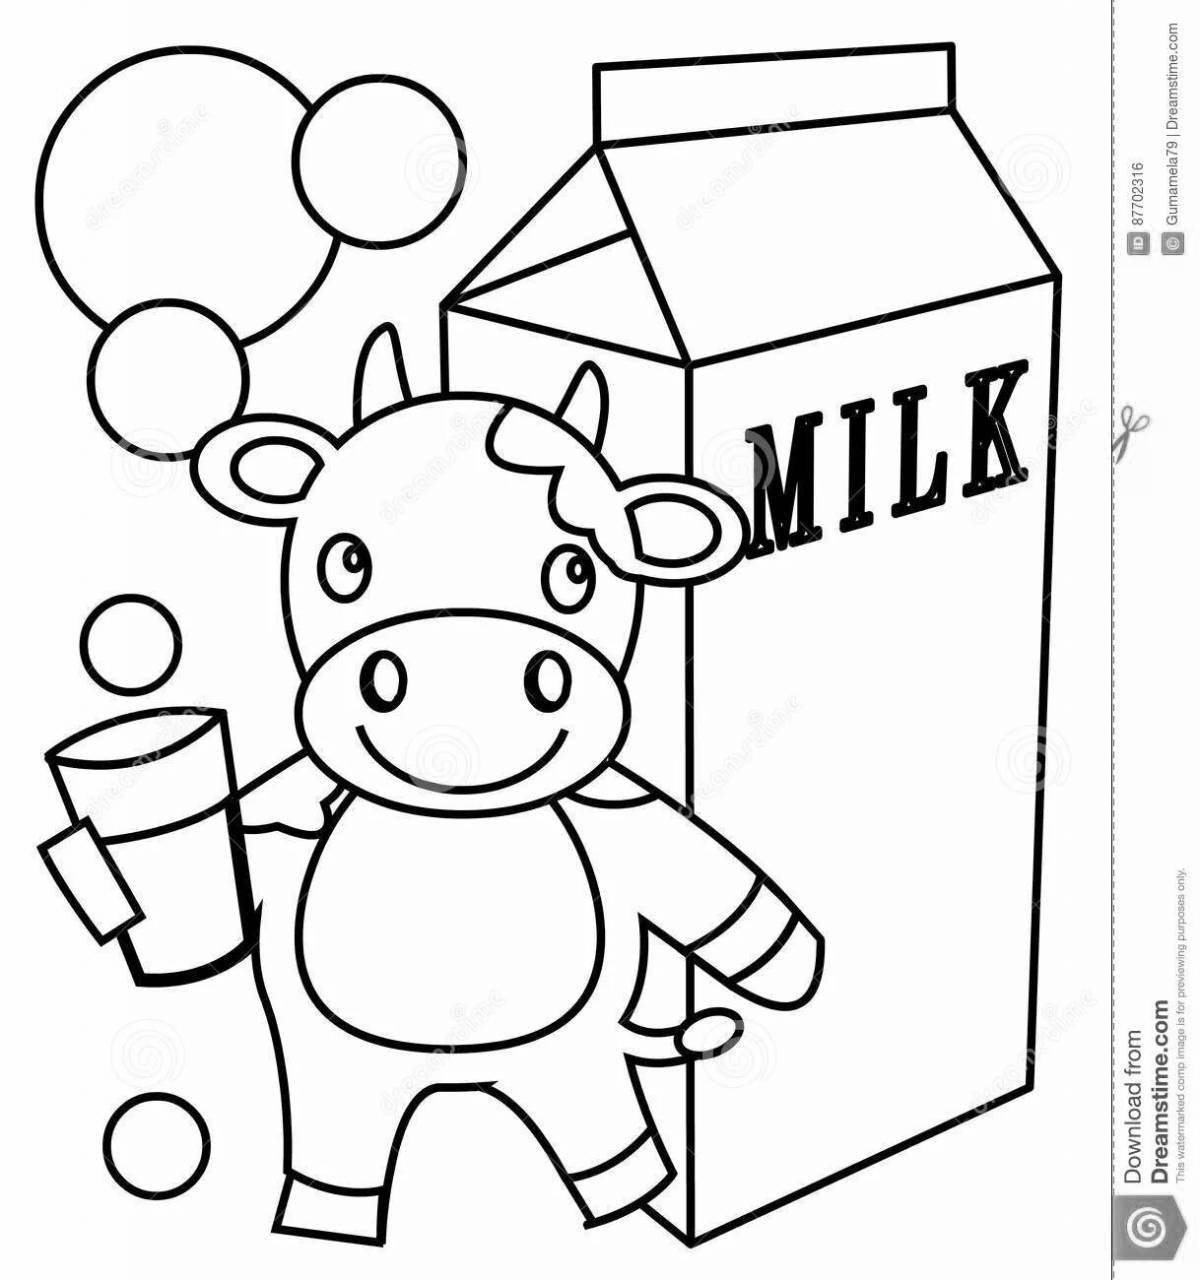 Refreshing advertisement coloring page